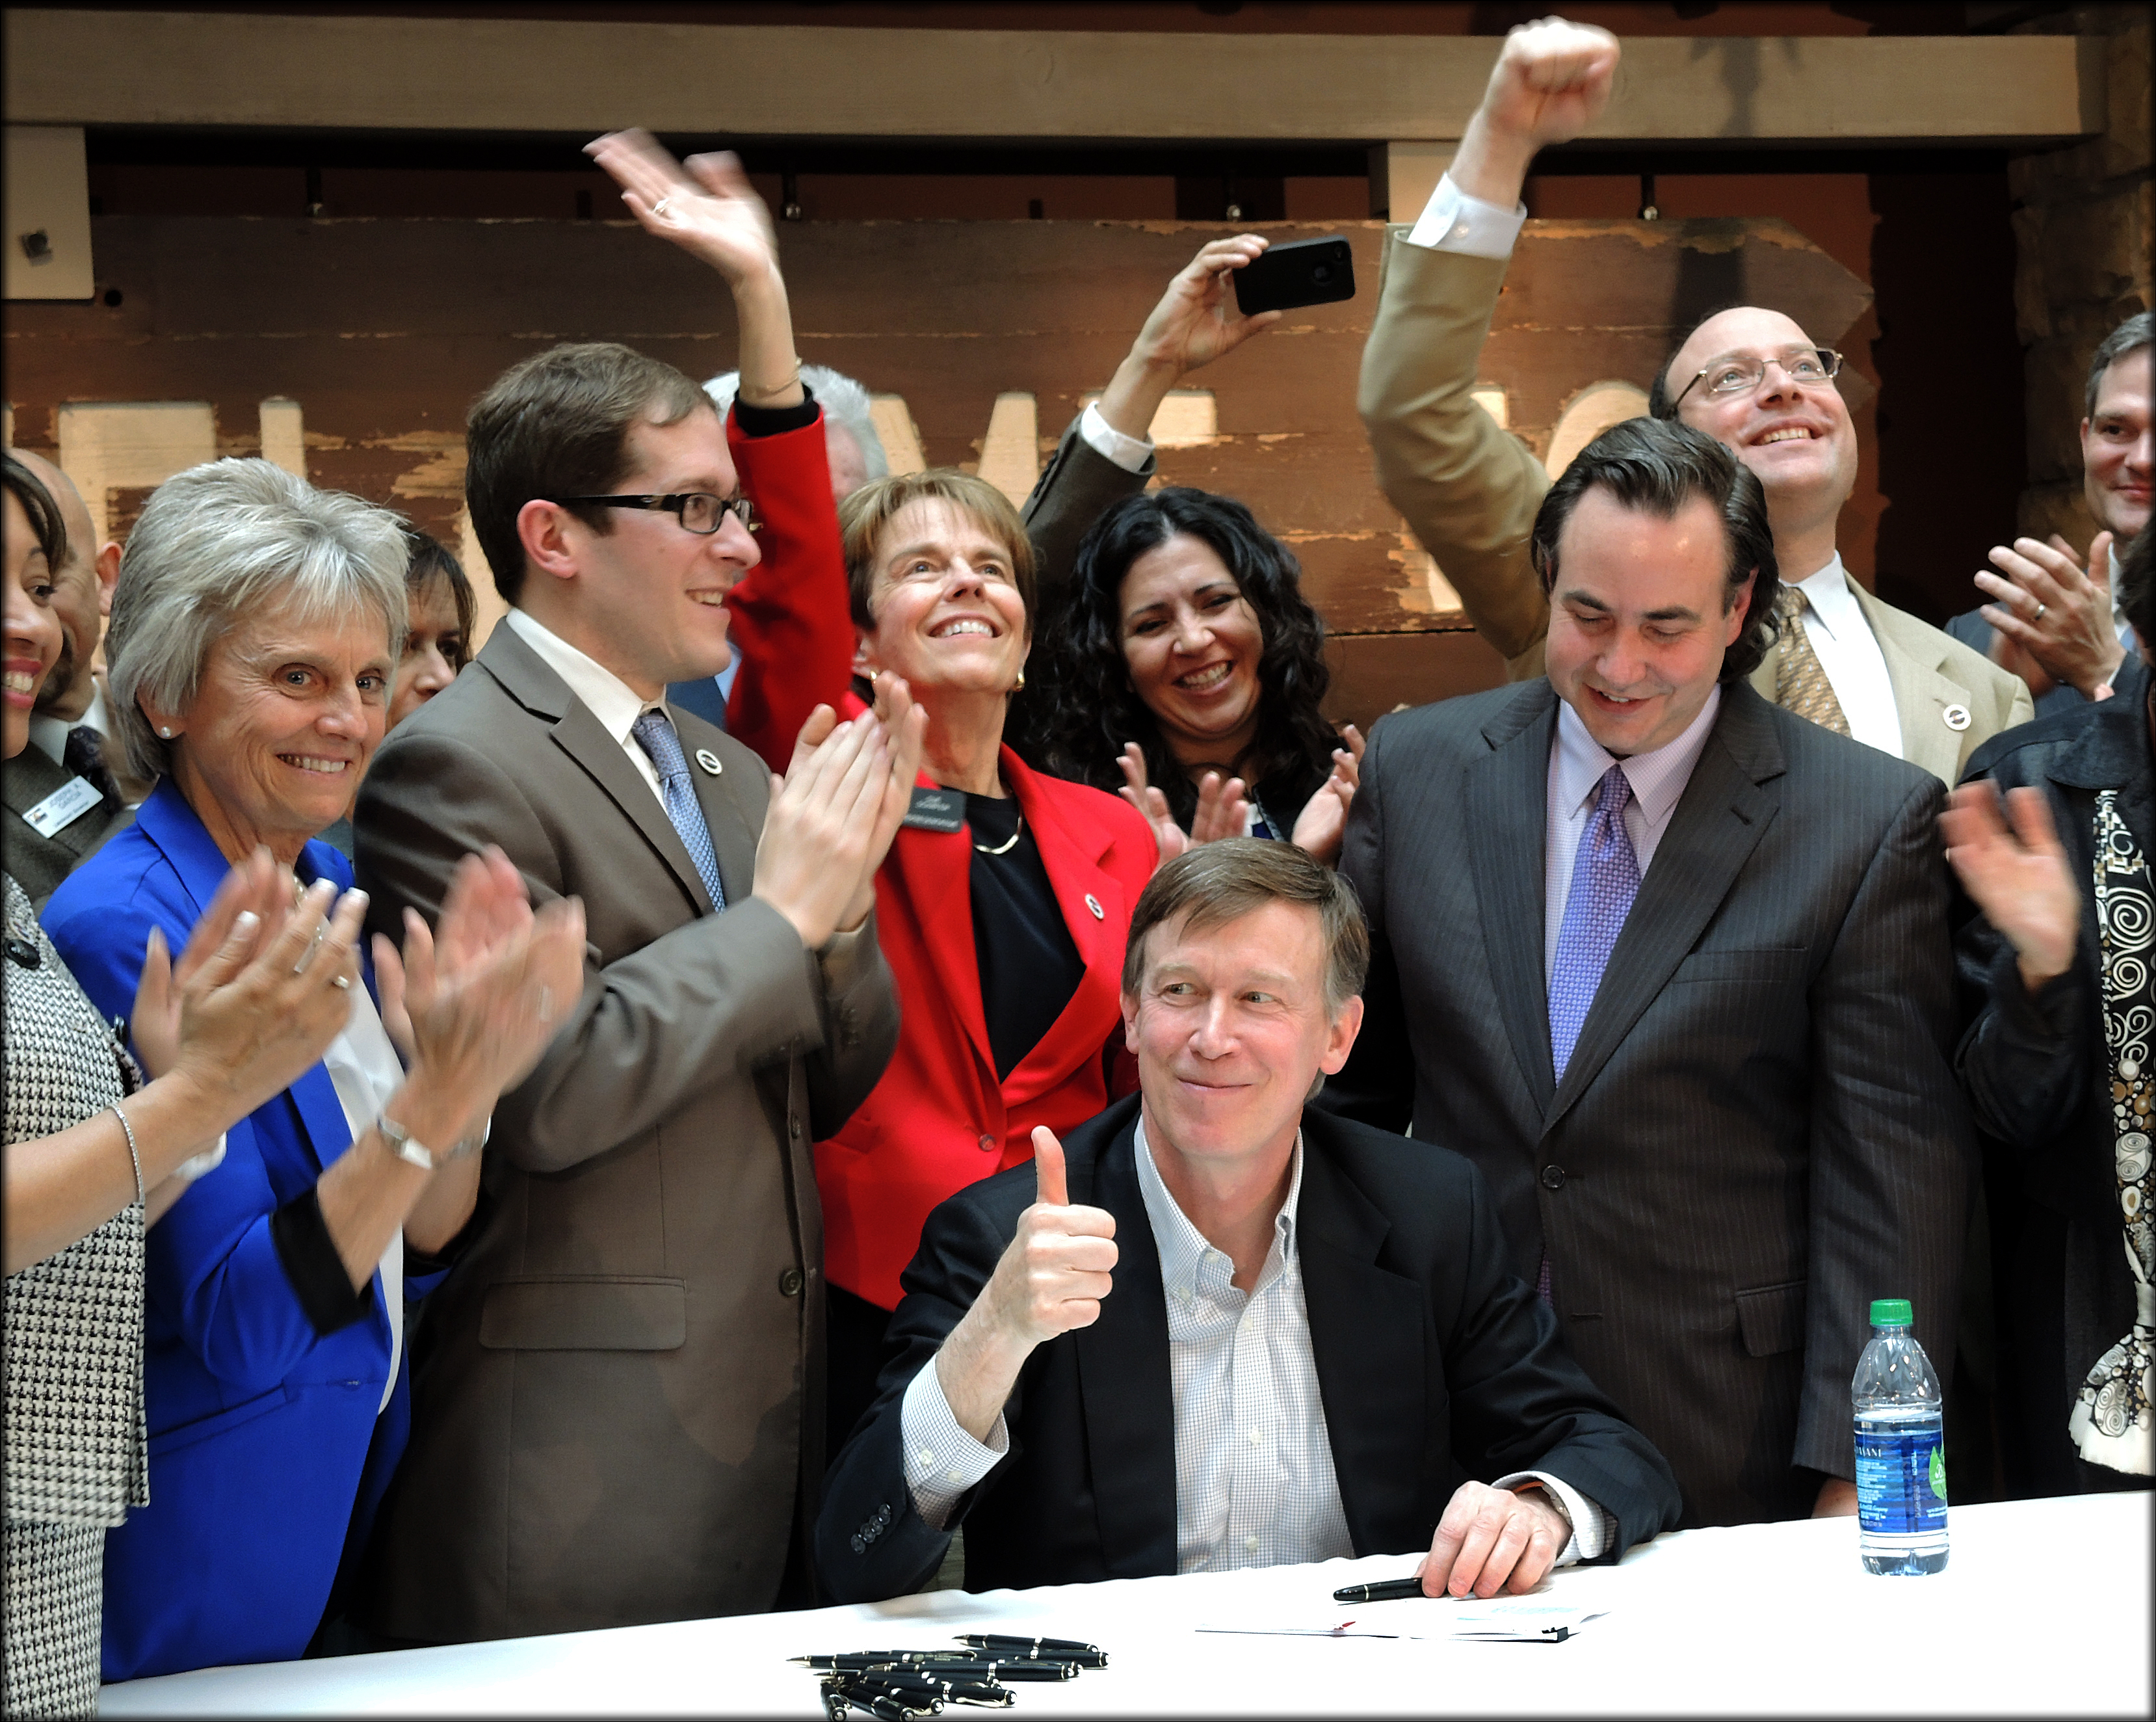 Governor Hickenlooper signs the historic Colorado Civil Union Act into law. Around him are Reps. Joann Ginal and Sue Schafer, Sen. Pat Steadman, and Speaker of the House Mark Ferrandino.